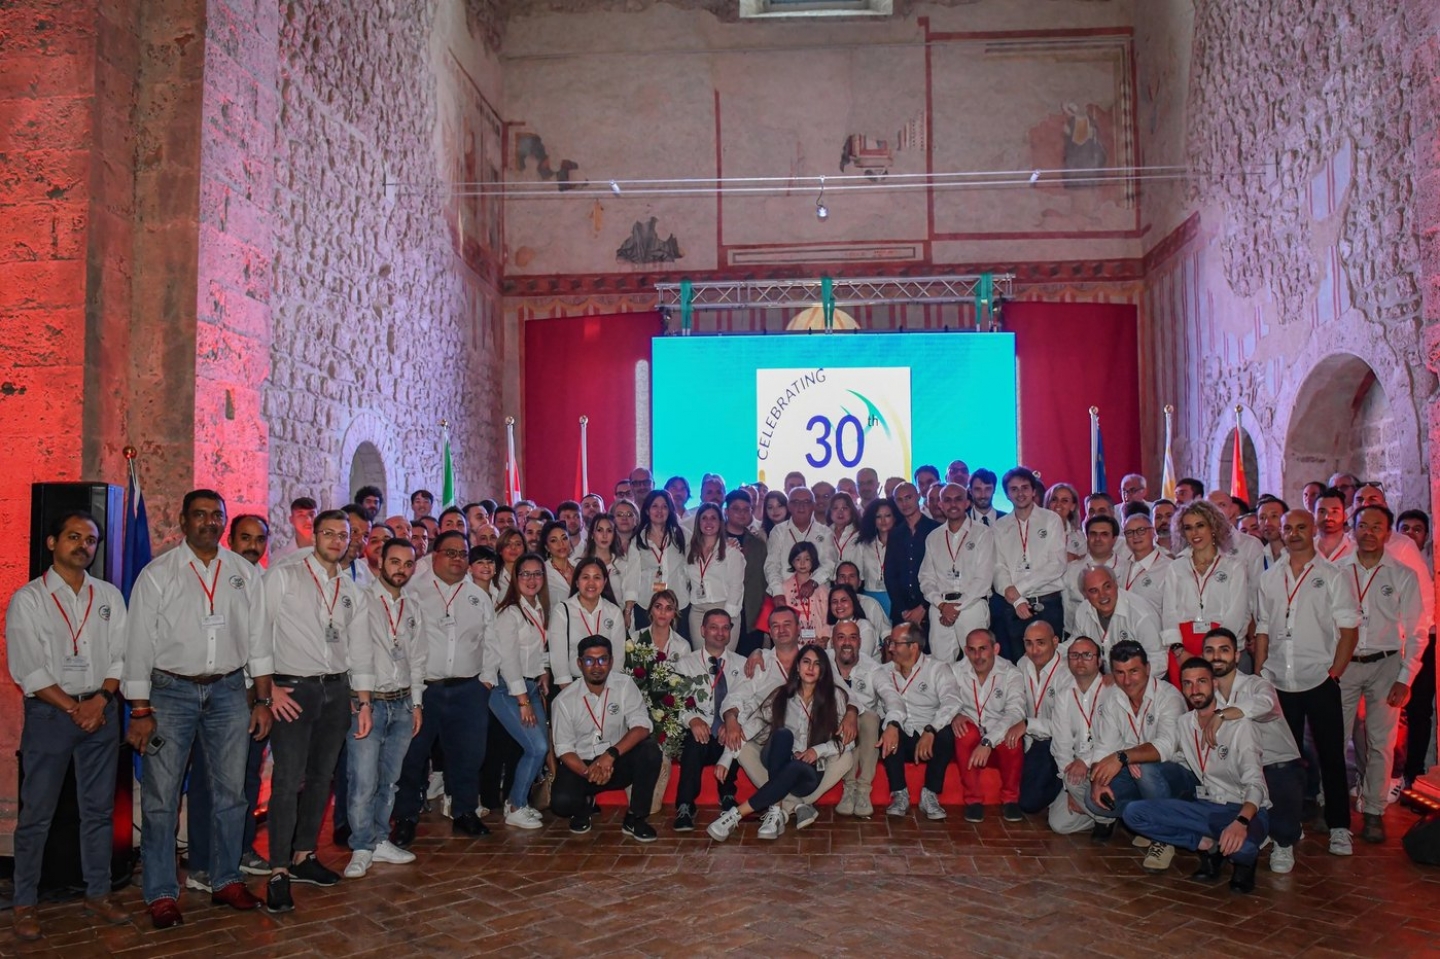 EDA Industries celebrated its 30th anniversary at the Abbey of San Pastore